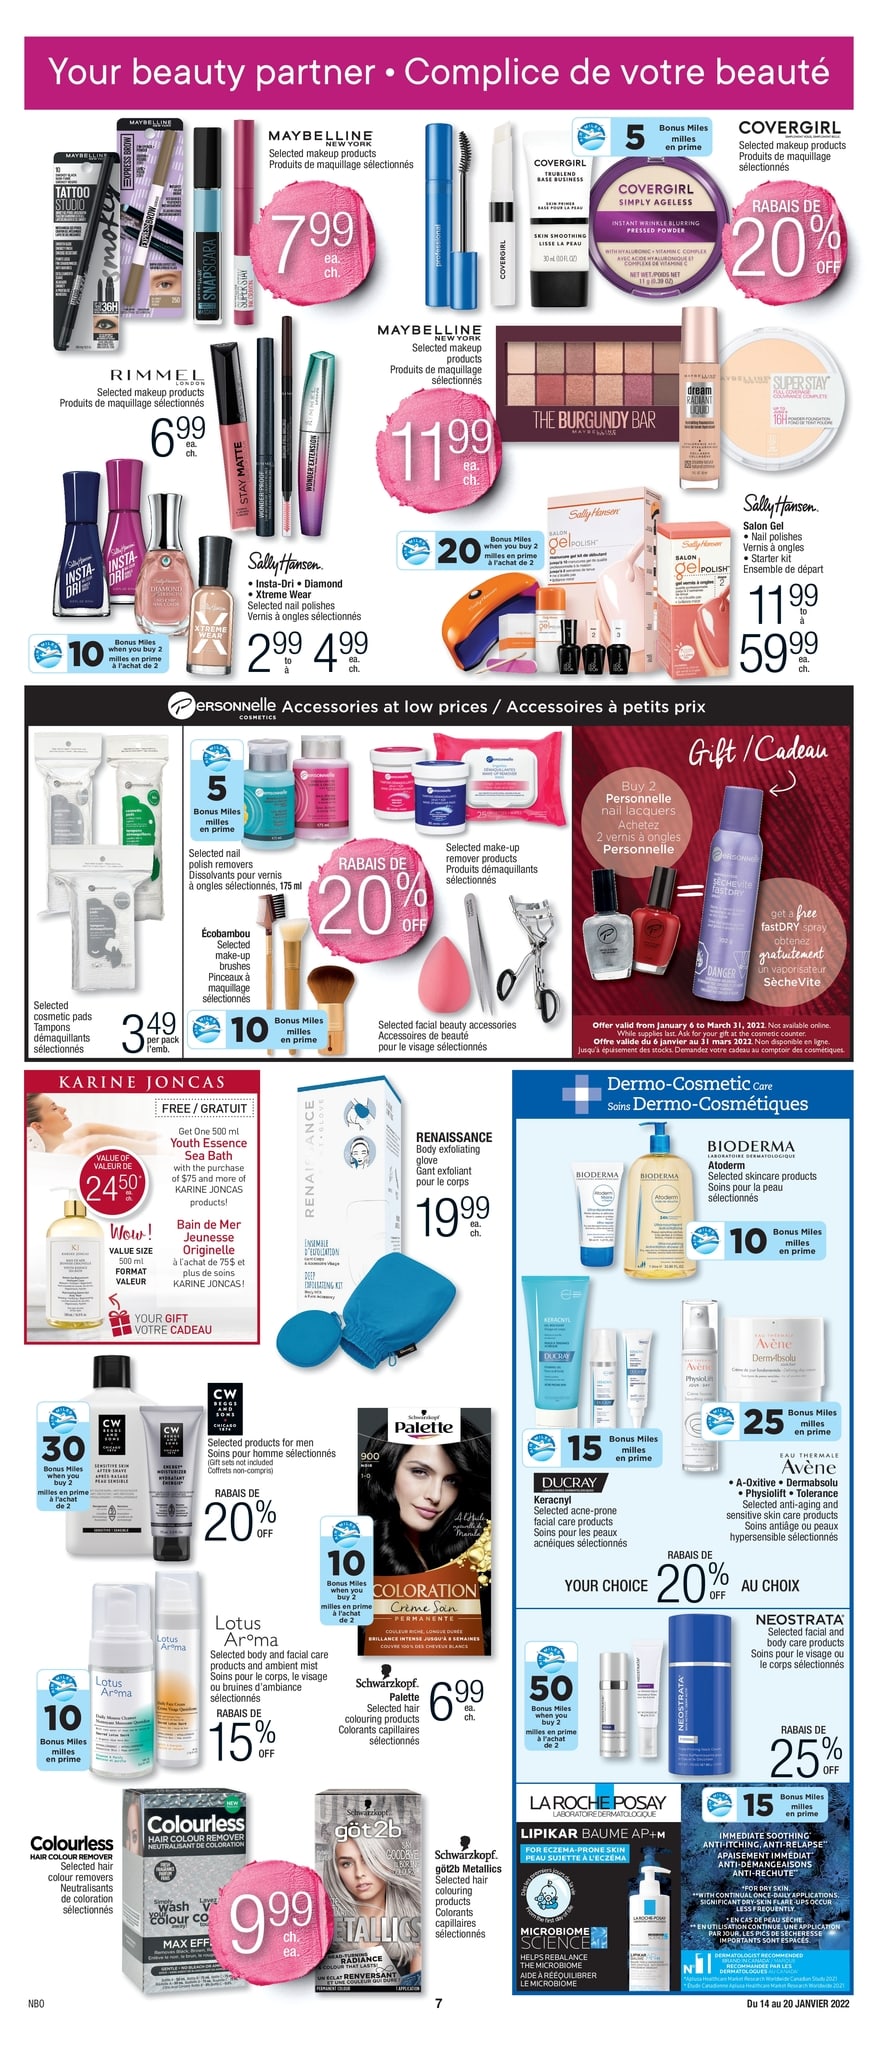 Jean Coutu - Weekly Flyer Specials - Page 7